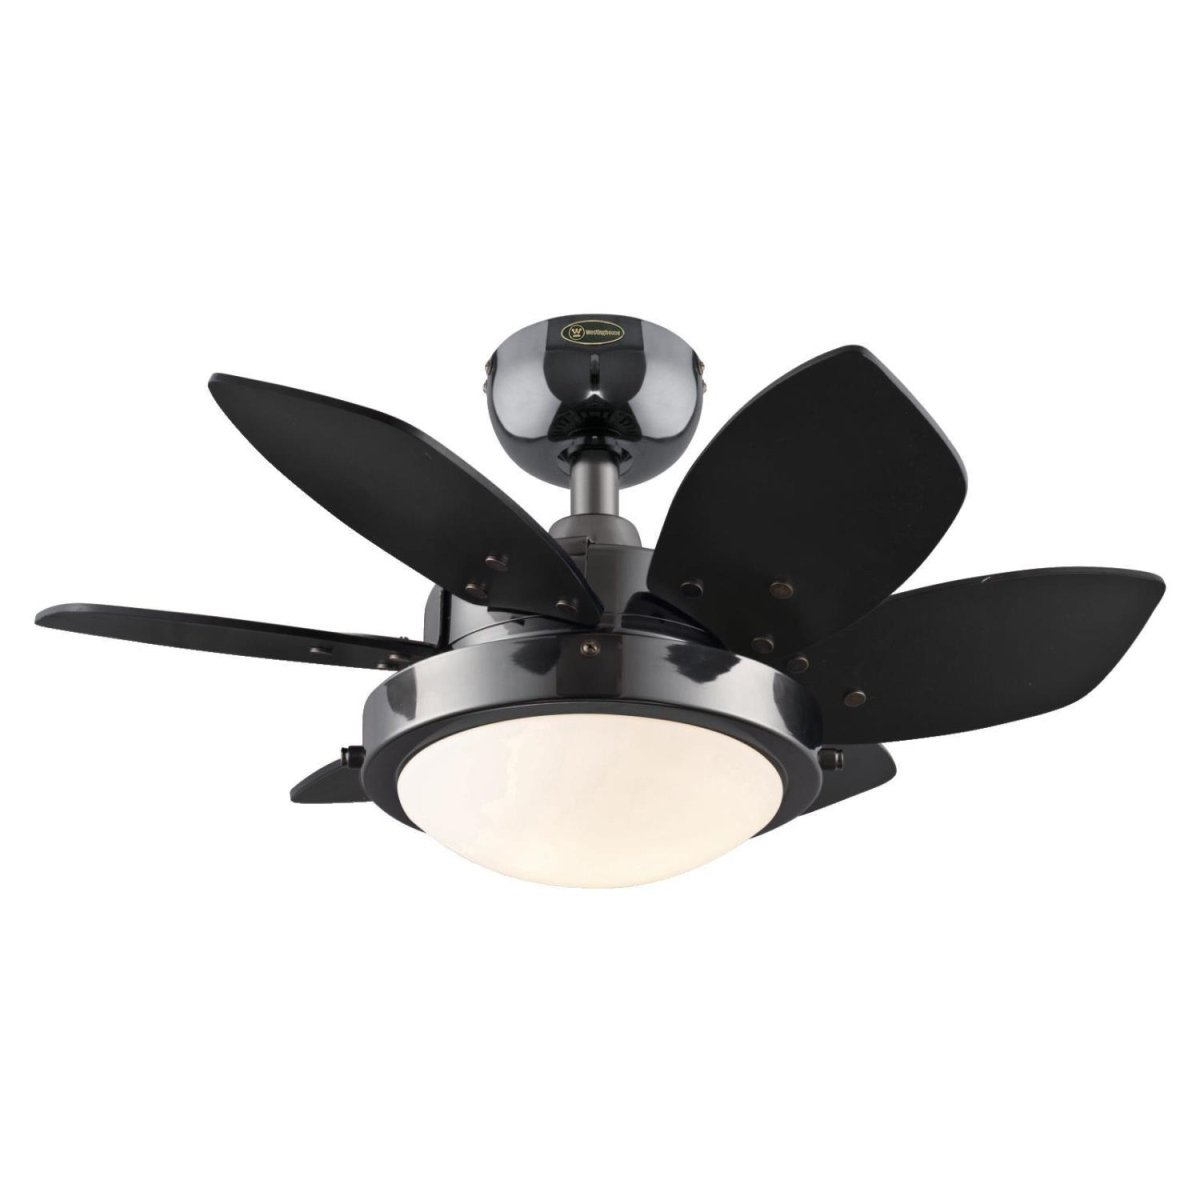 Picture of Westinghouse 7224600 24 in. Gun Metal Opal Frosted Glass Indoor Ceiling Fan with Reversible Blades Black & Graphite